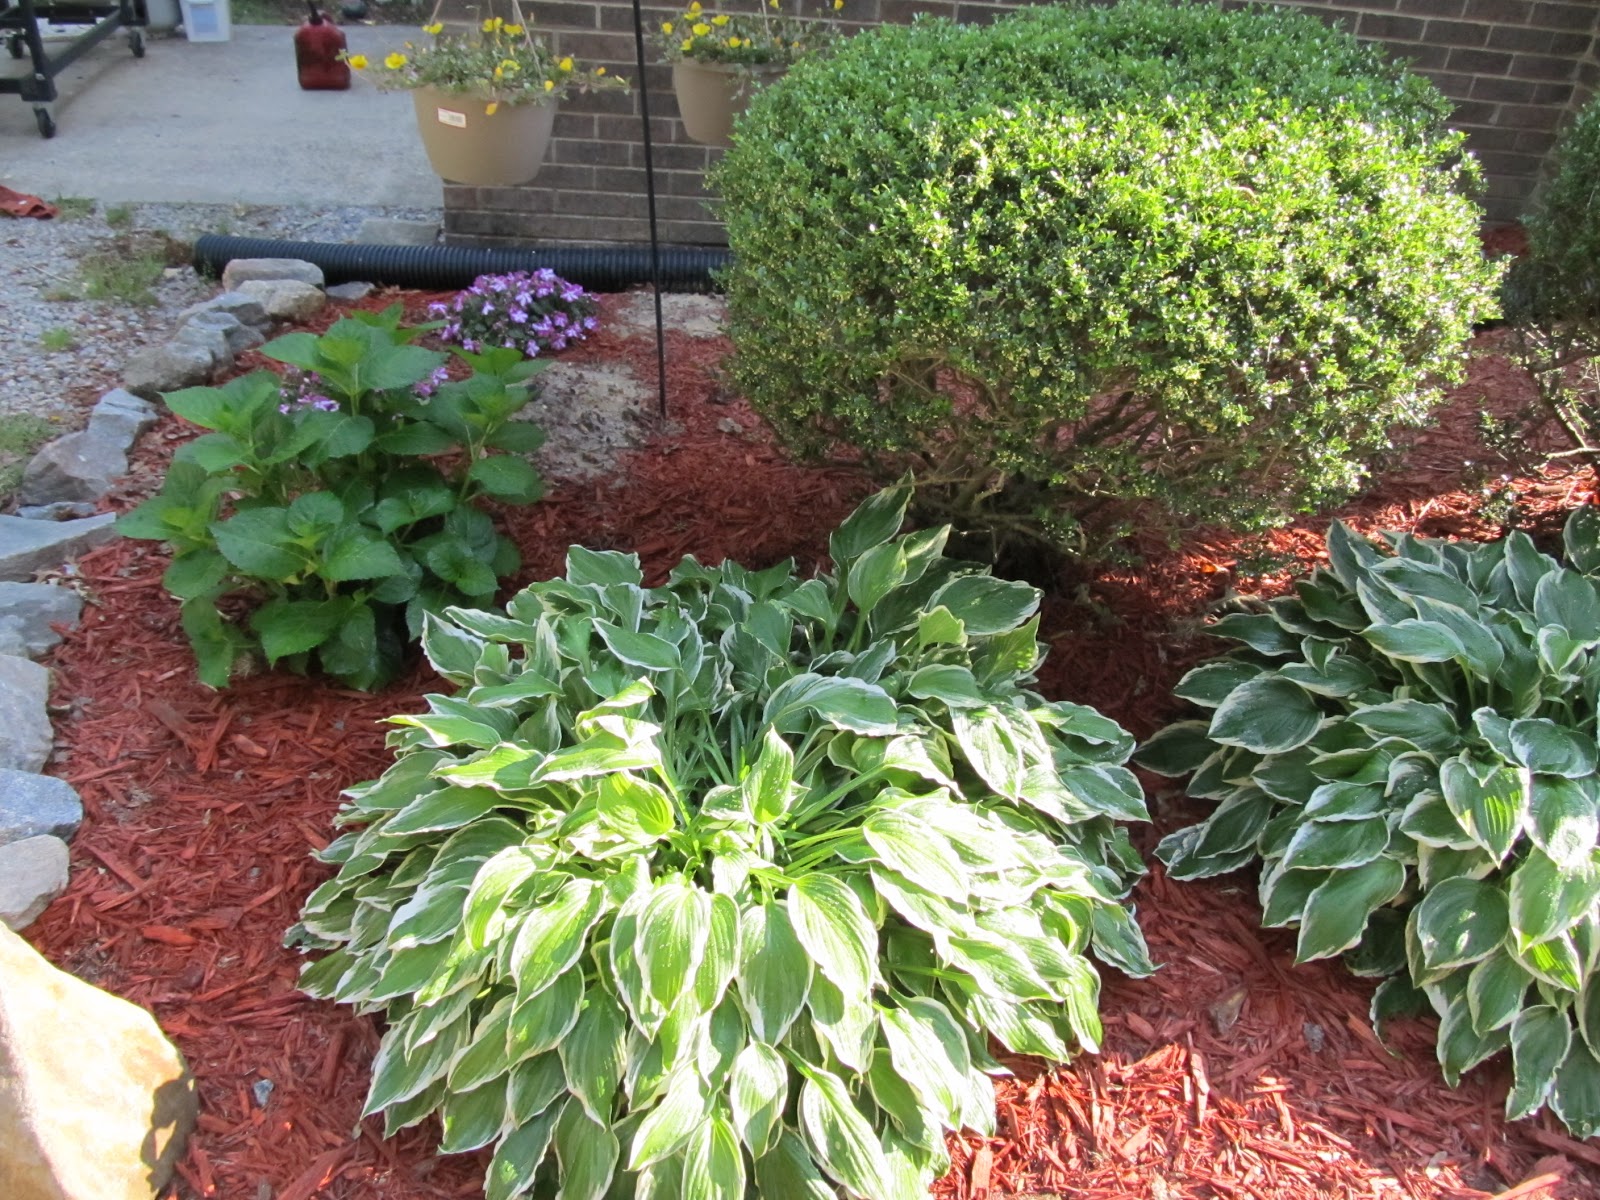 10 in 2010--The Journey of a Lifetime: Landscaping on a budget